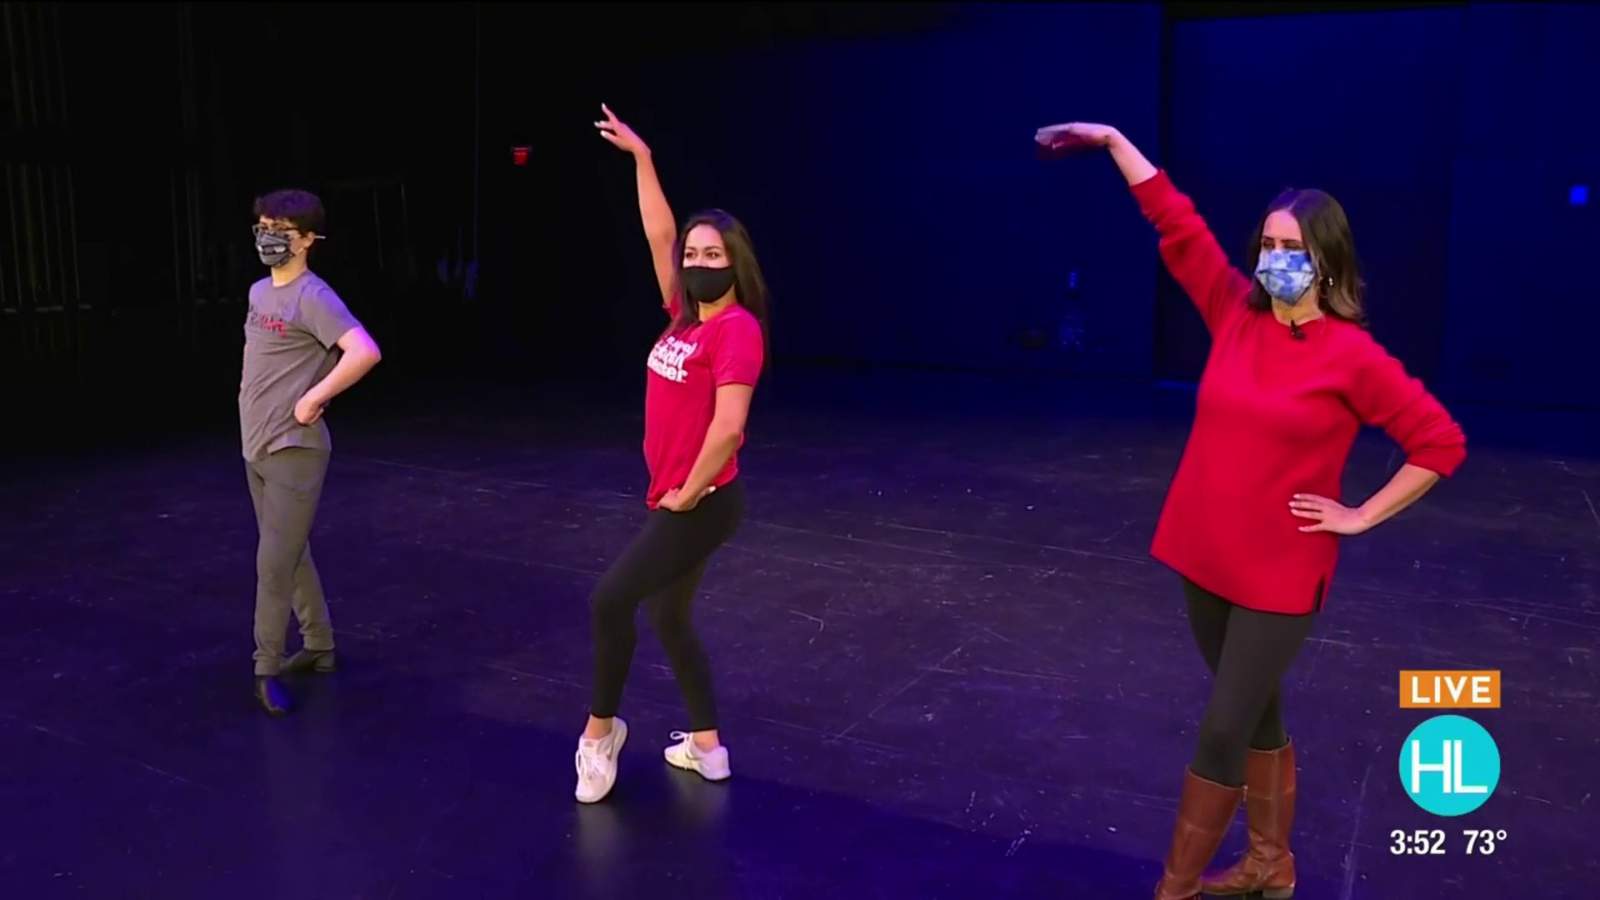 National Youth Theater offering Spring dance classes, theater, camps for all ages